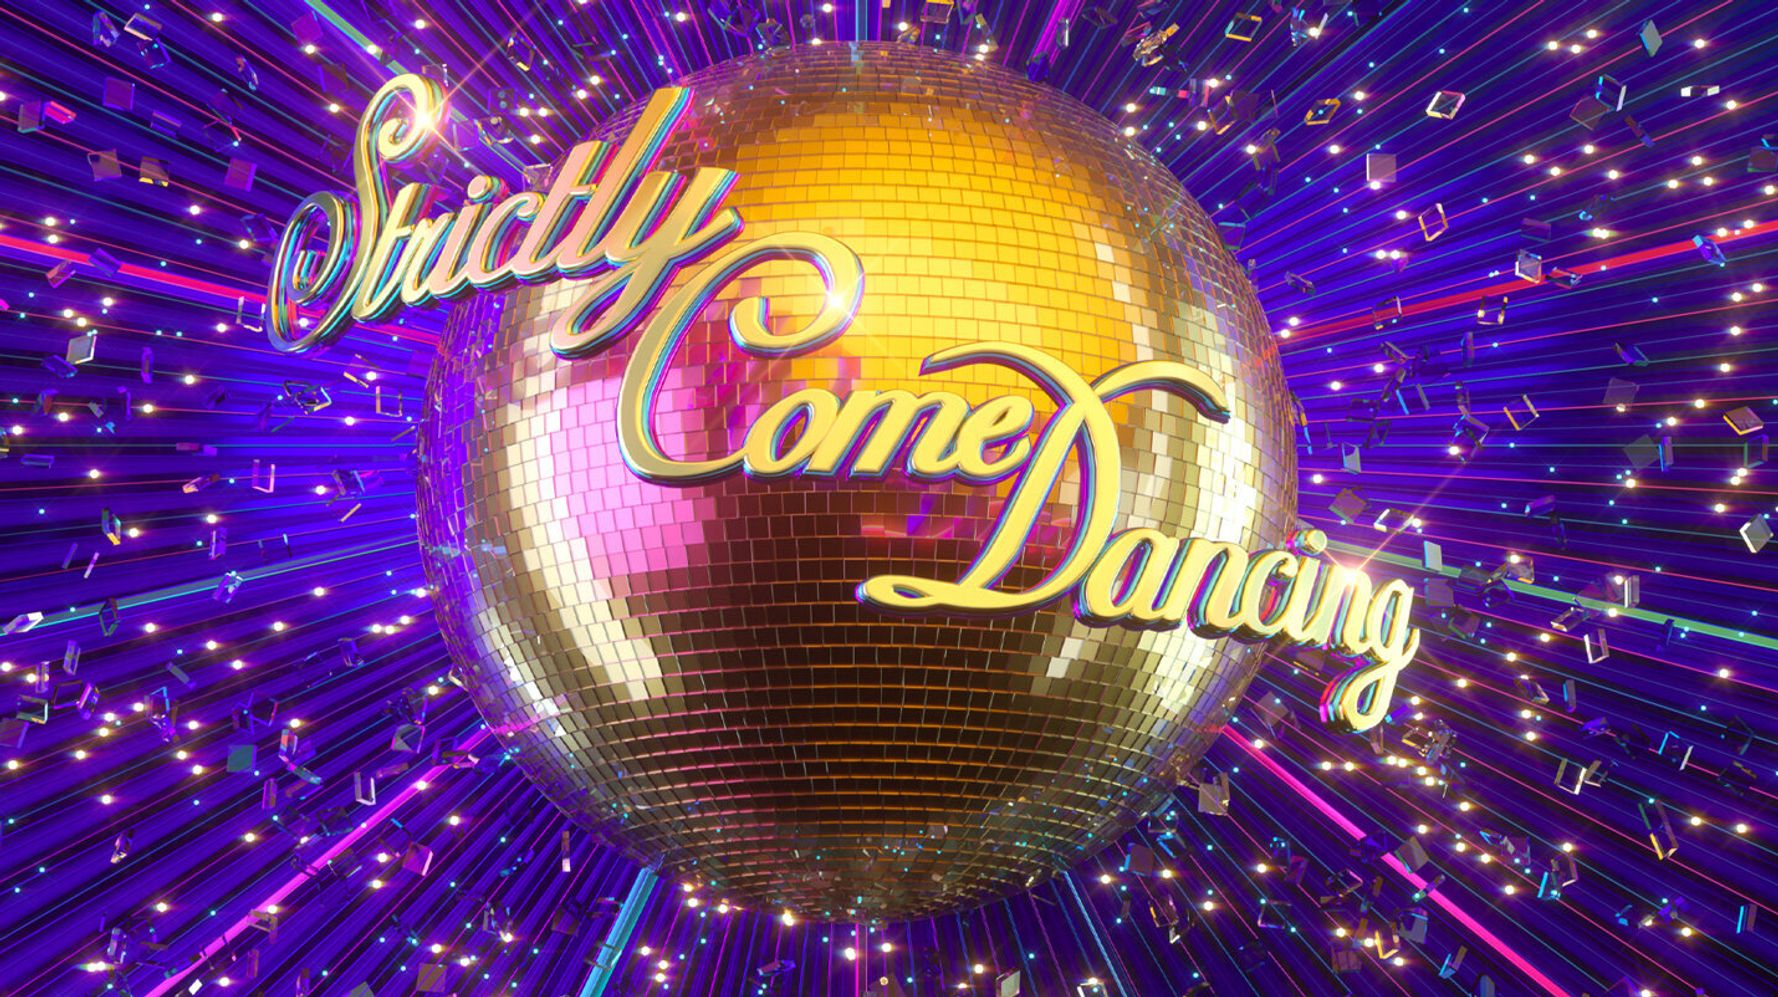 Strictly Come Dancing Adds Paralympic Swimmer Ellie Simmonds To Line-Up